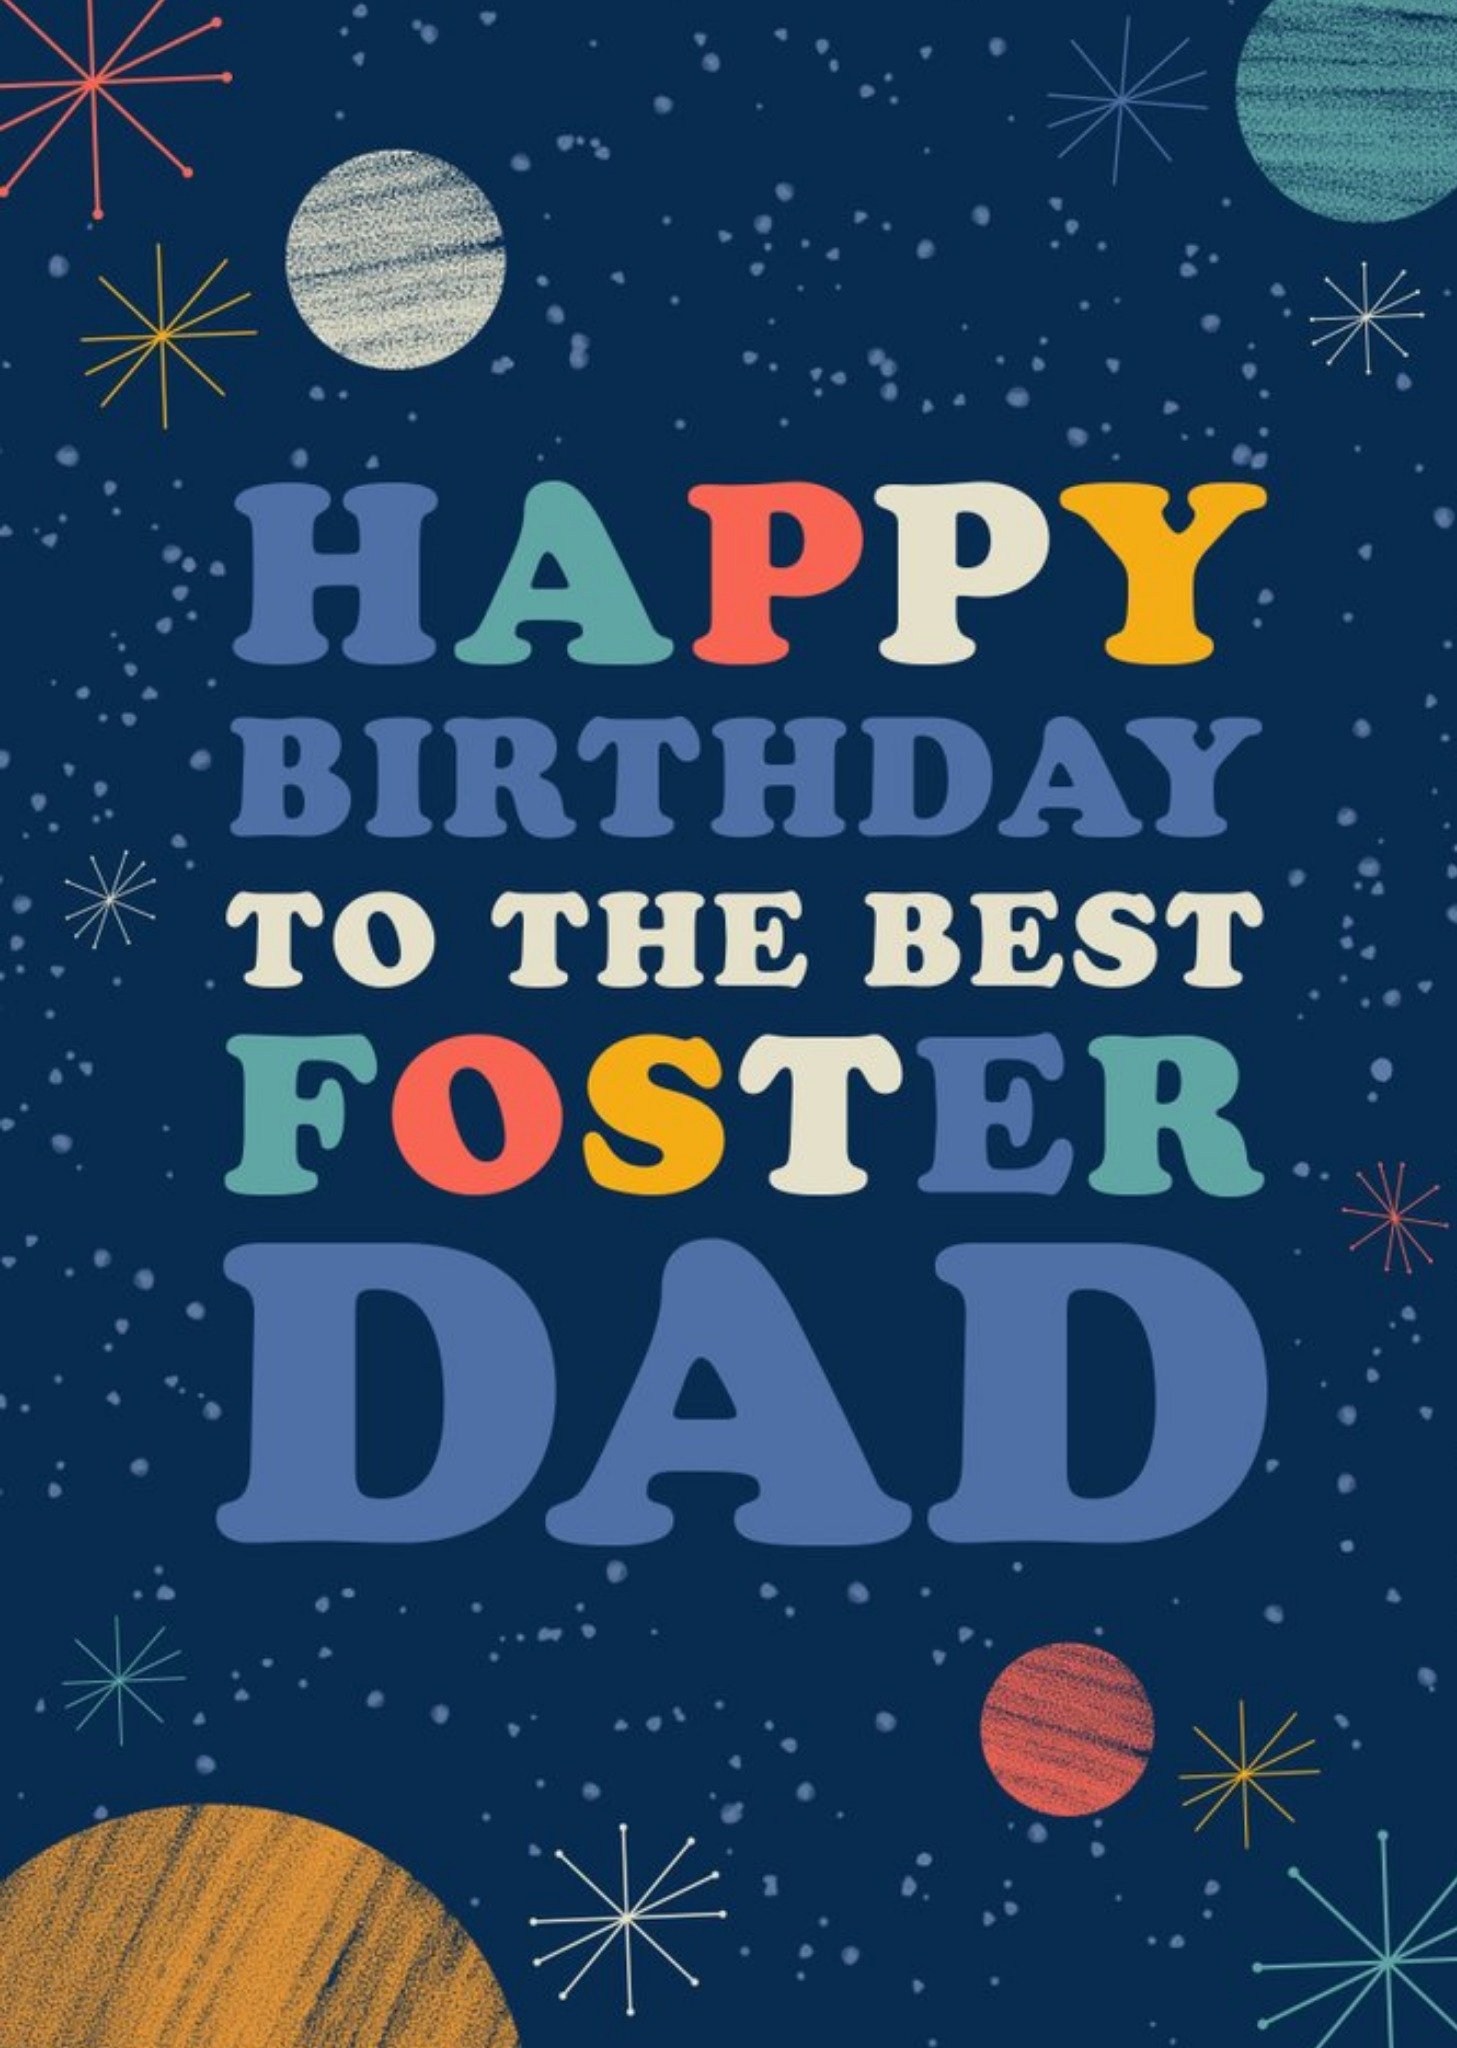 Moonpig Typographic Space Illustration Happy Birthday To The Best Foster Dad Card, Large